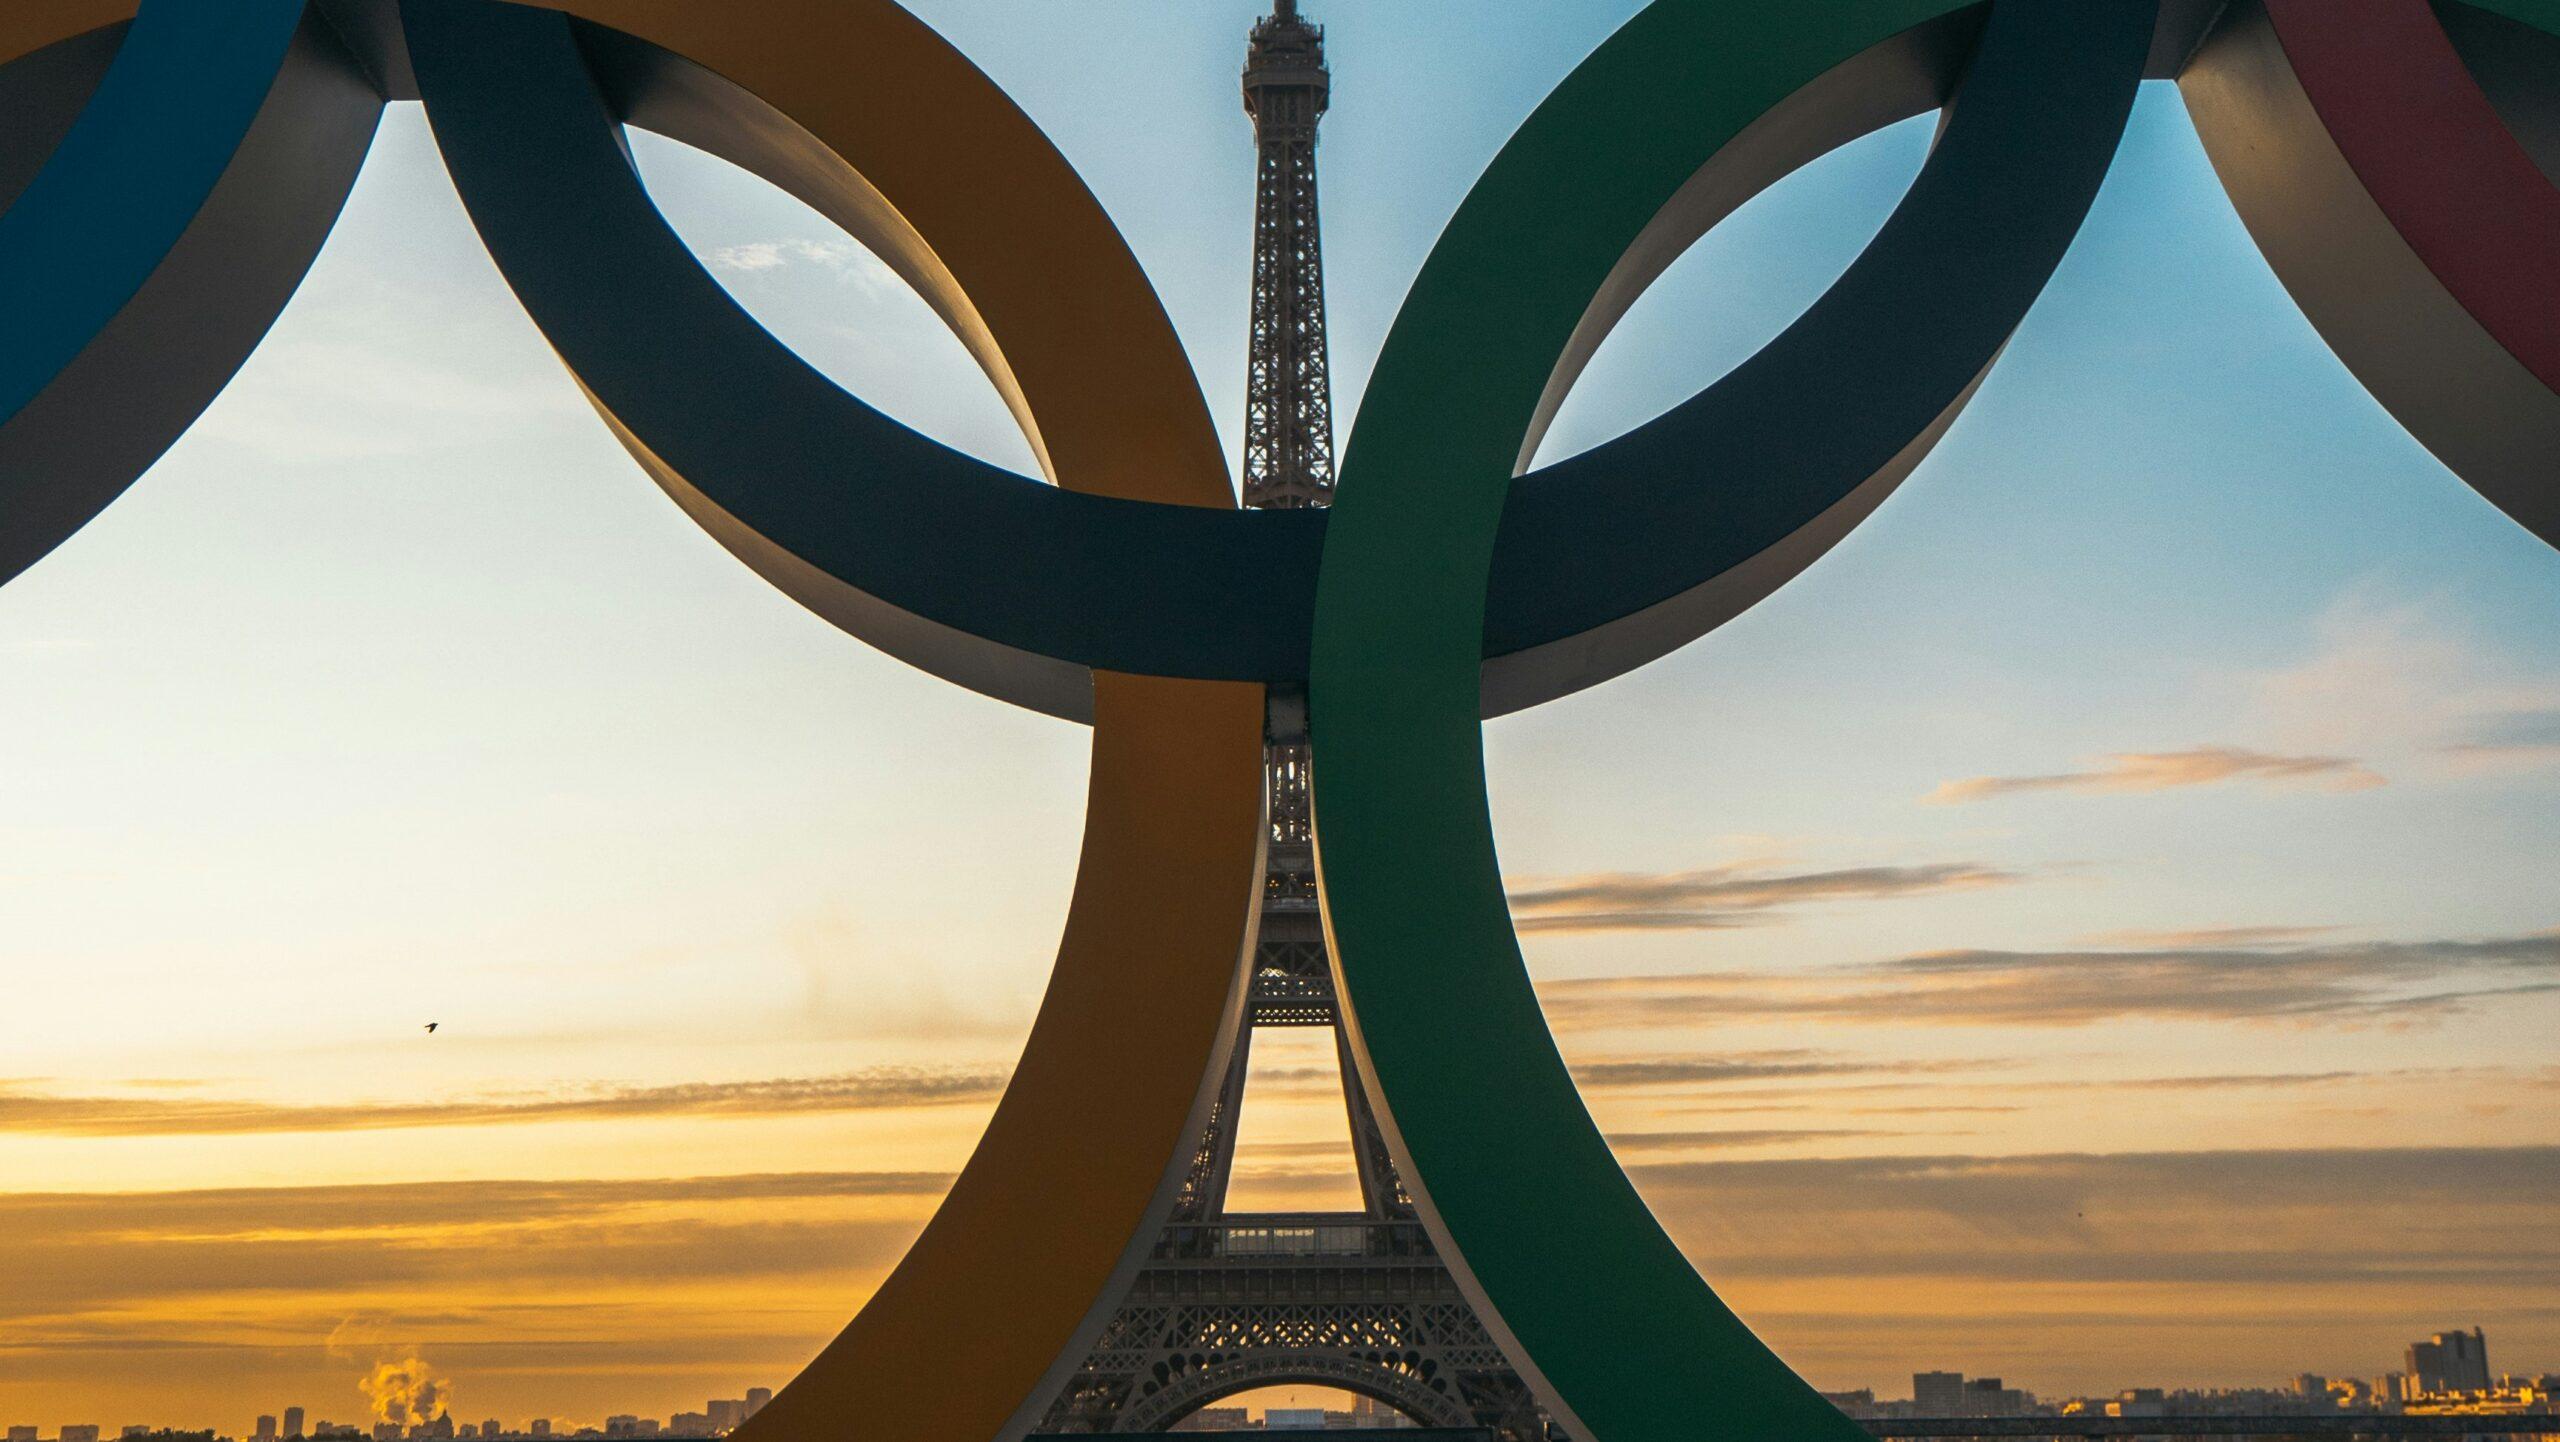 Close up of the Olympic rings in front of the Eiffel Tower in Paris, France.